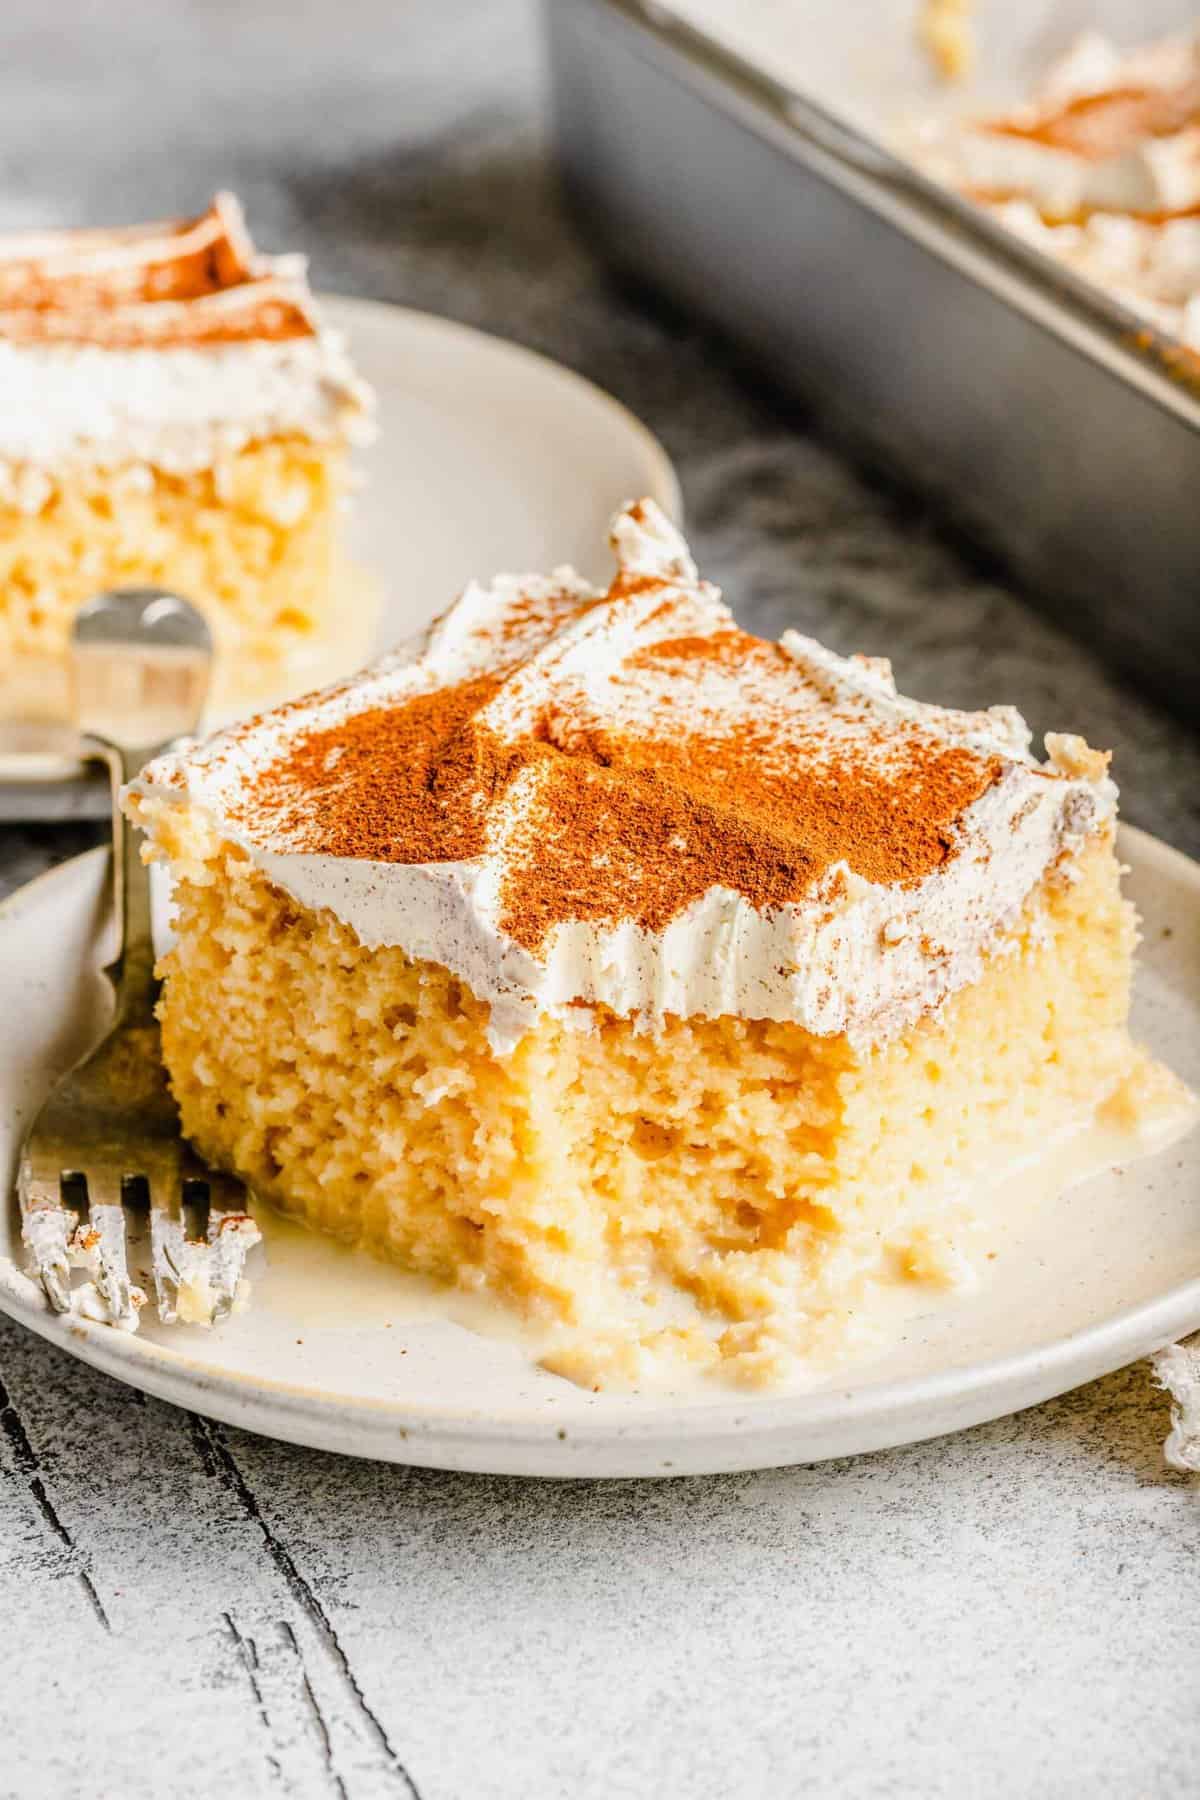 2 slices of tres leches cake on plates with a fork next to the cake pan.